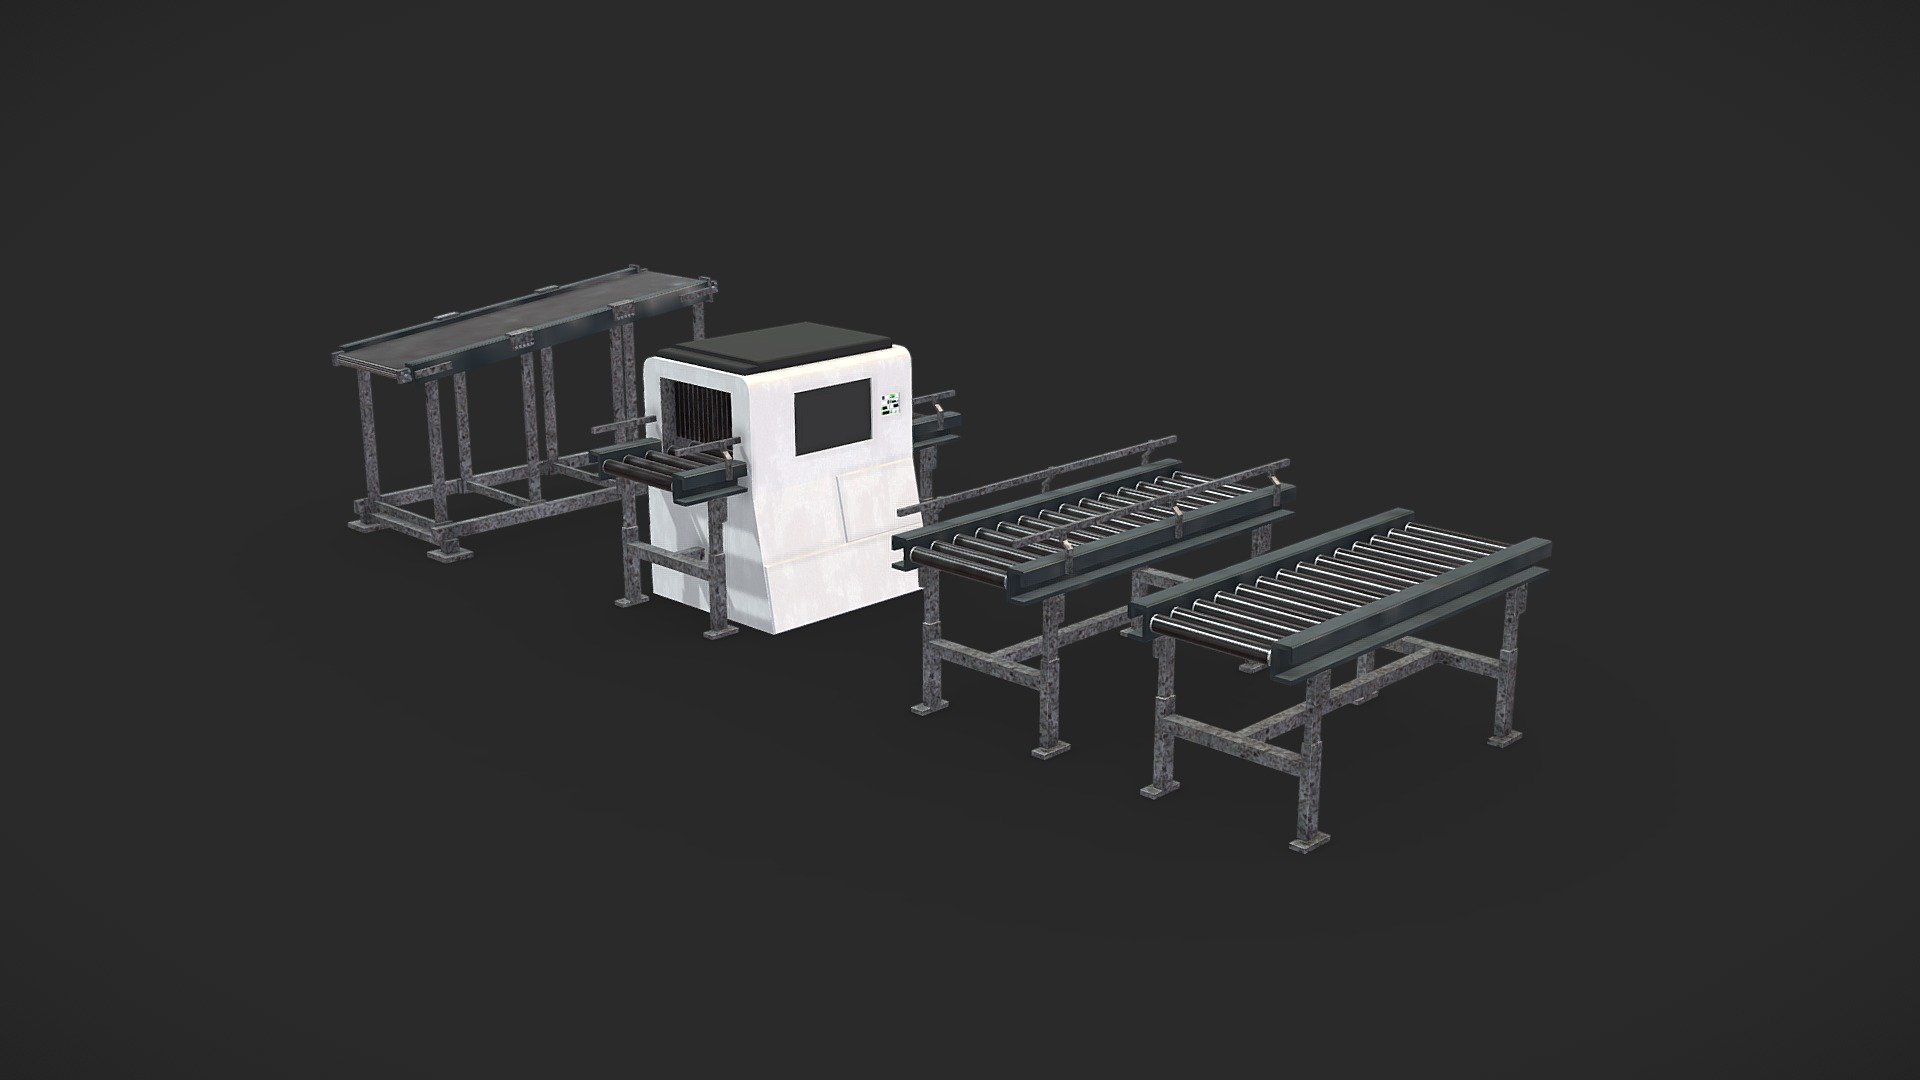 Industrial Conveyor belt system. Includes :


2 Striaght Conveyors with and without railing
Angled Conveyor Belt
Xray Conveyor Machine

Perfect for industrial warehouses, airports, factorys, global shipping monopolies, etc.

Includes PBR's - Conveyor Belt Xray Pack - Buy Royalty Free 3D model by Unreal Designer (@unrealdesigner.ig) 3d model